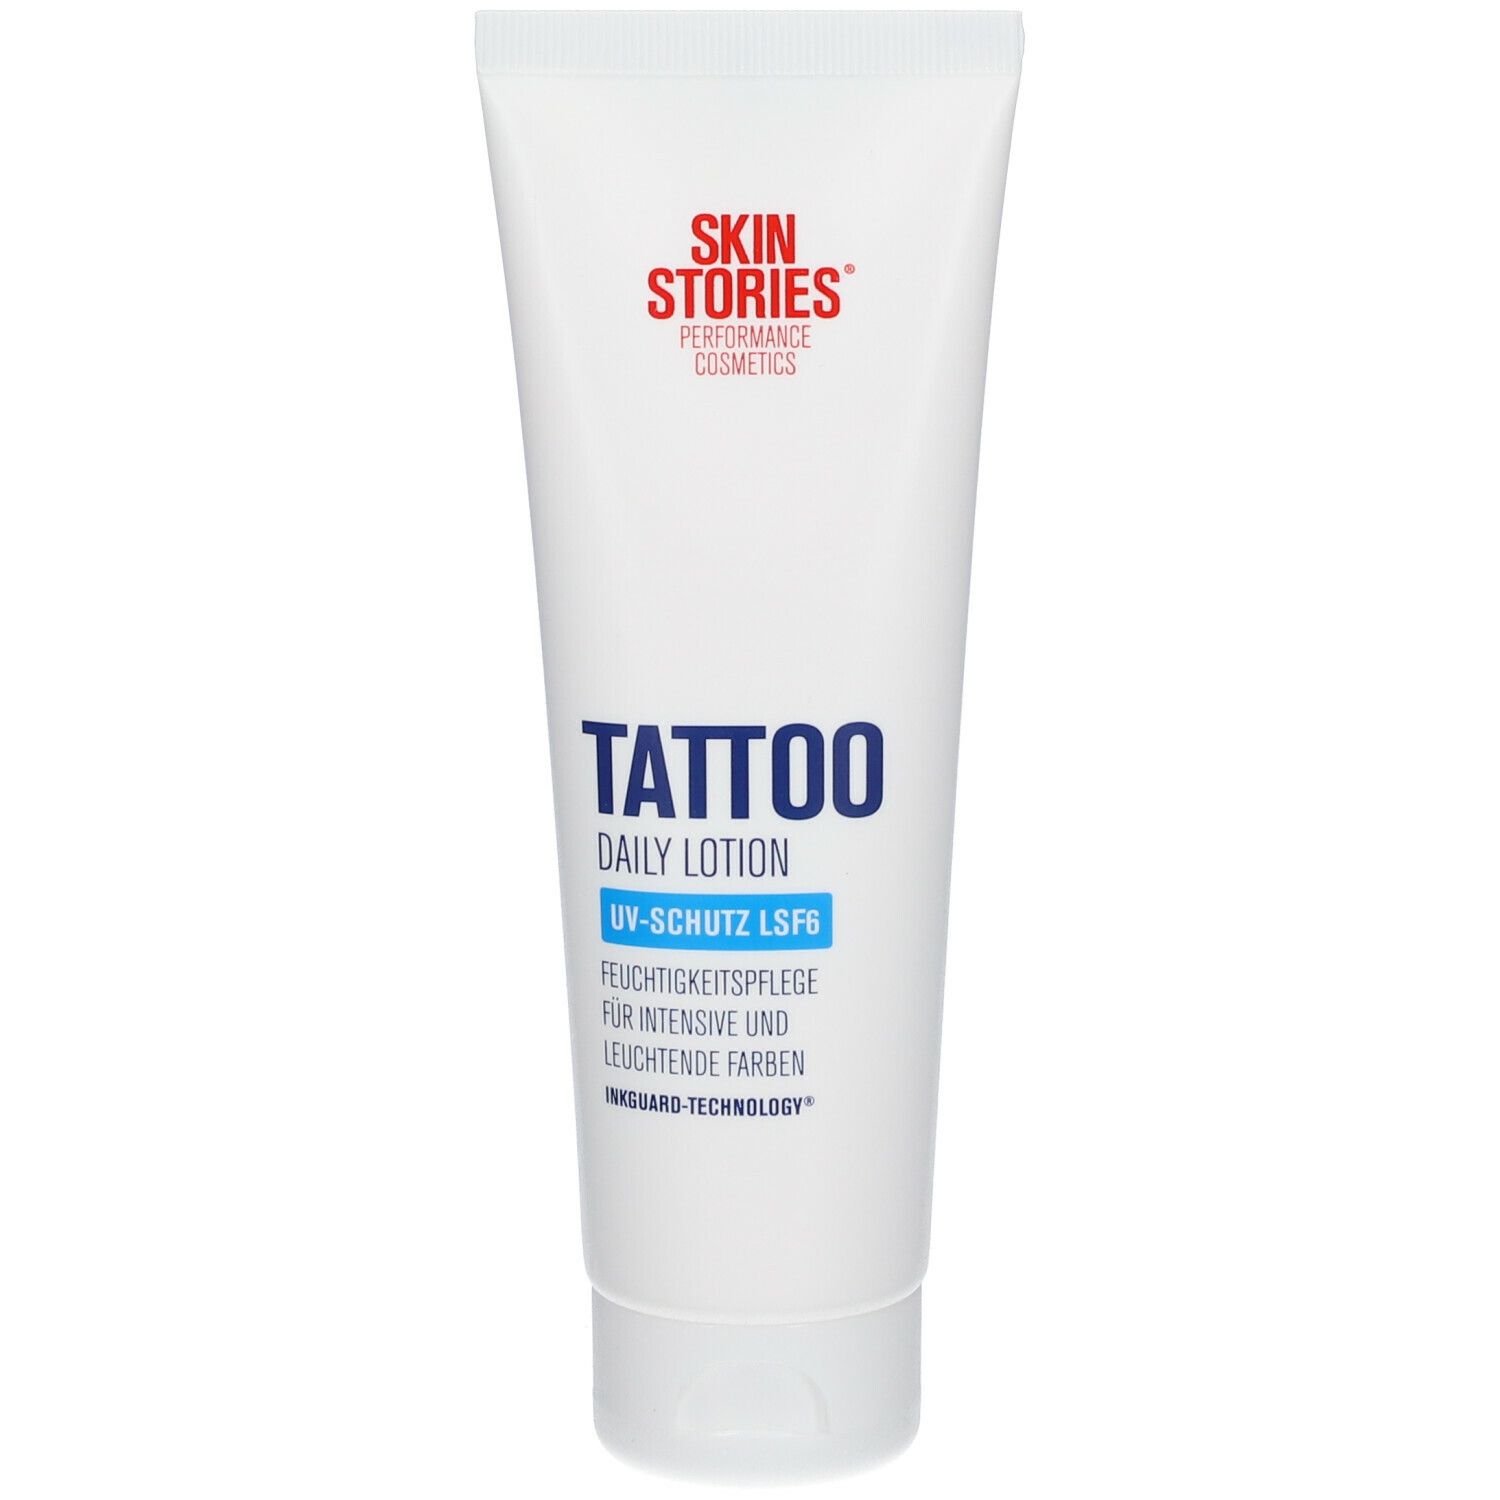 SKIN STORIES® Daily Lotion